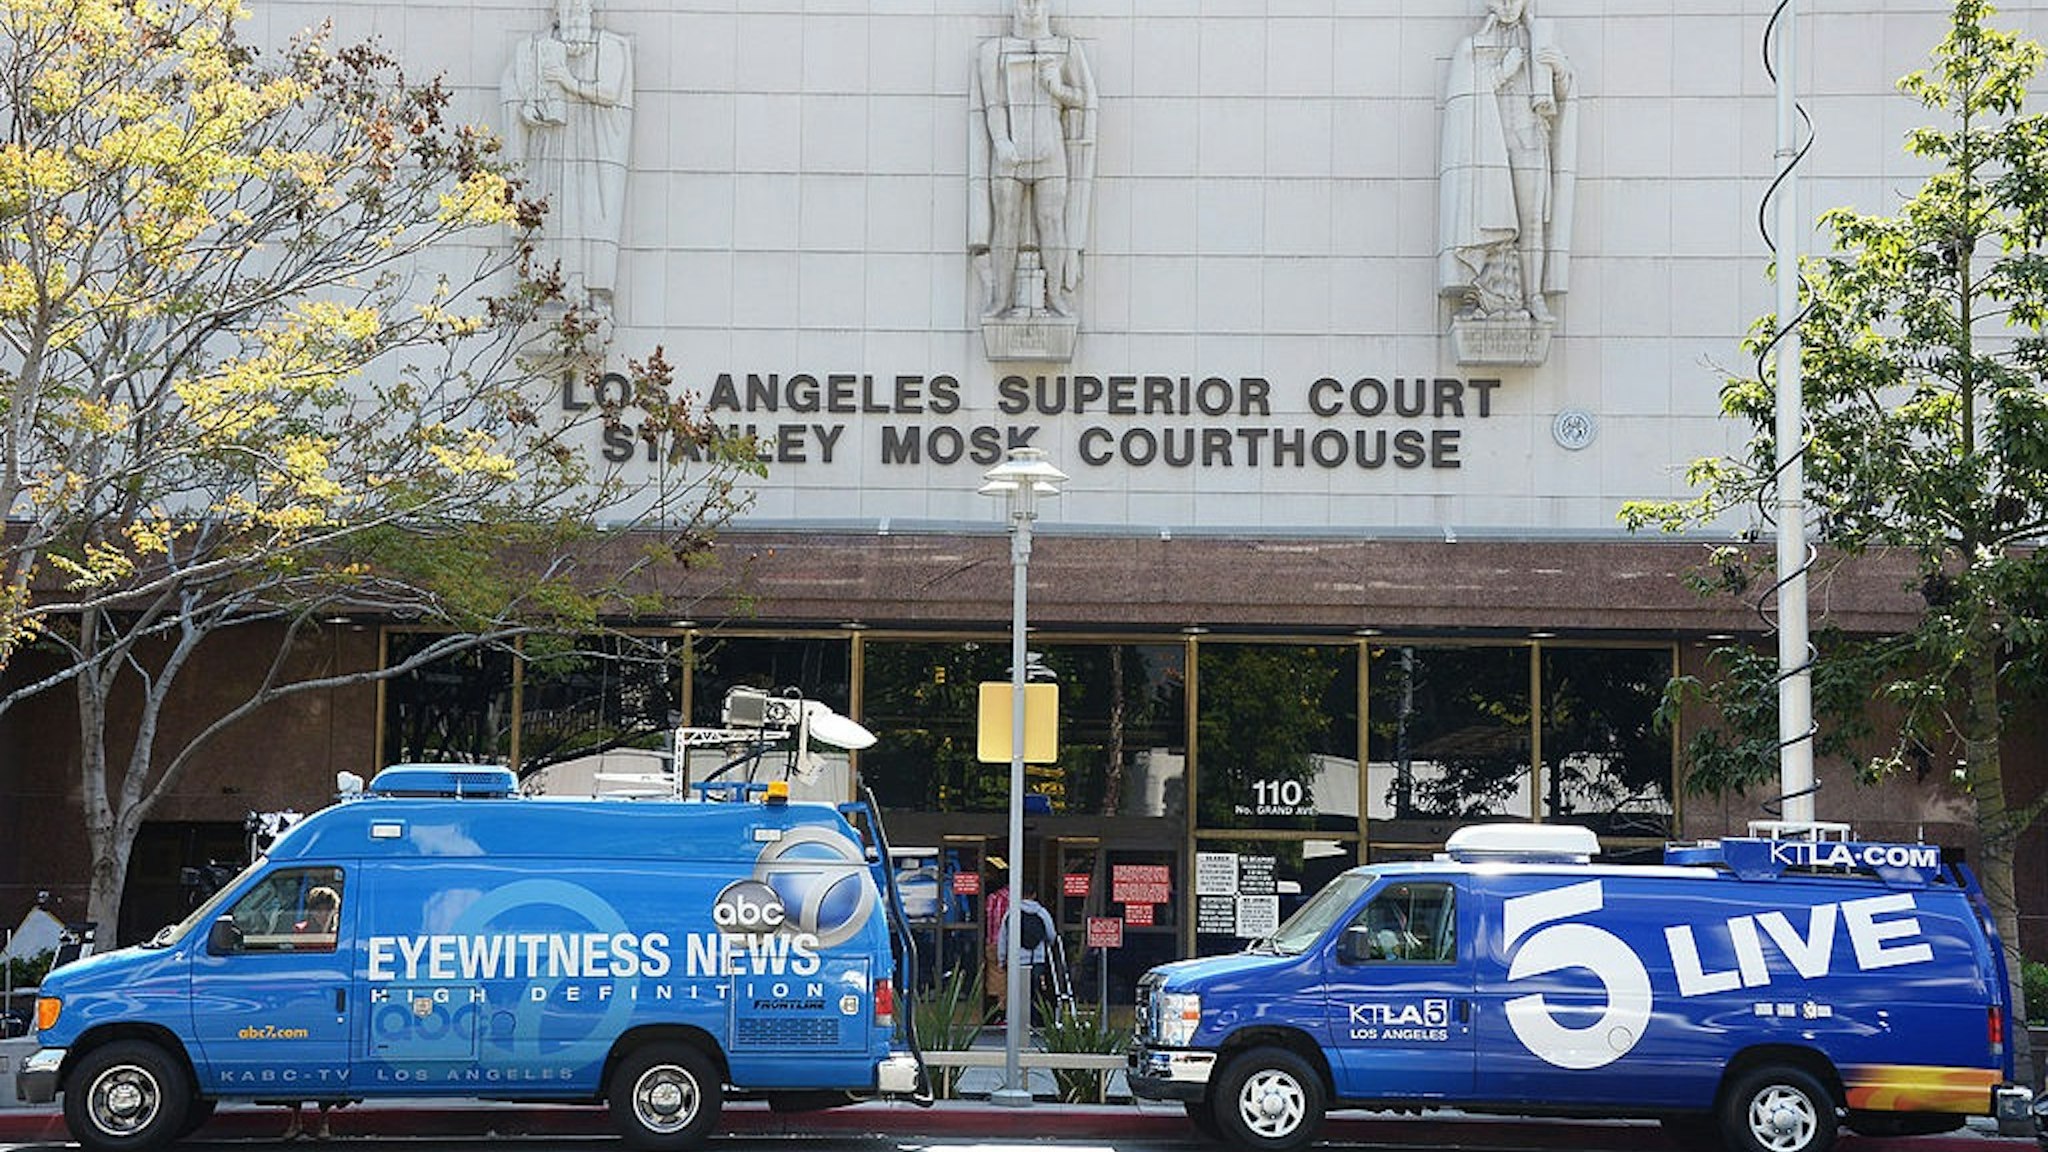 Television news broadcasting vans are parked outside of Los Angeles Superior Court where media are reporting from on the first day of trial of Katherine Jackson and Michael’s children against concert promoter AEG Live at Los Angeles Superior Court on April 02, 2013 in Los Angeles, California.